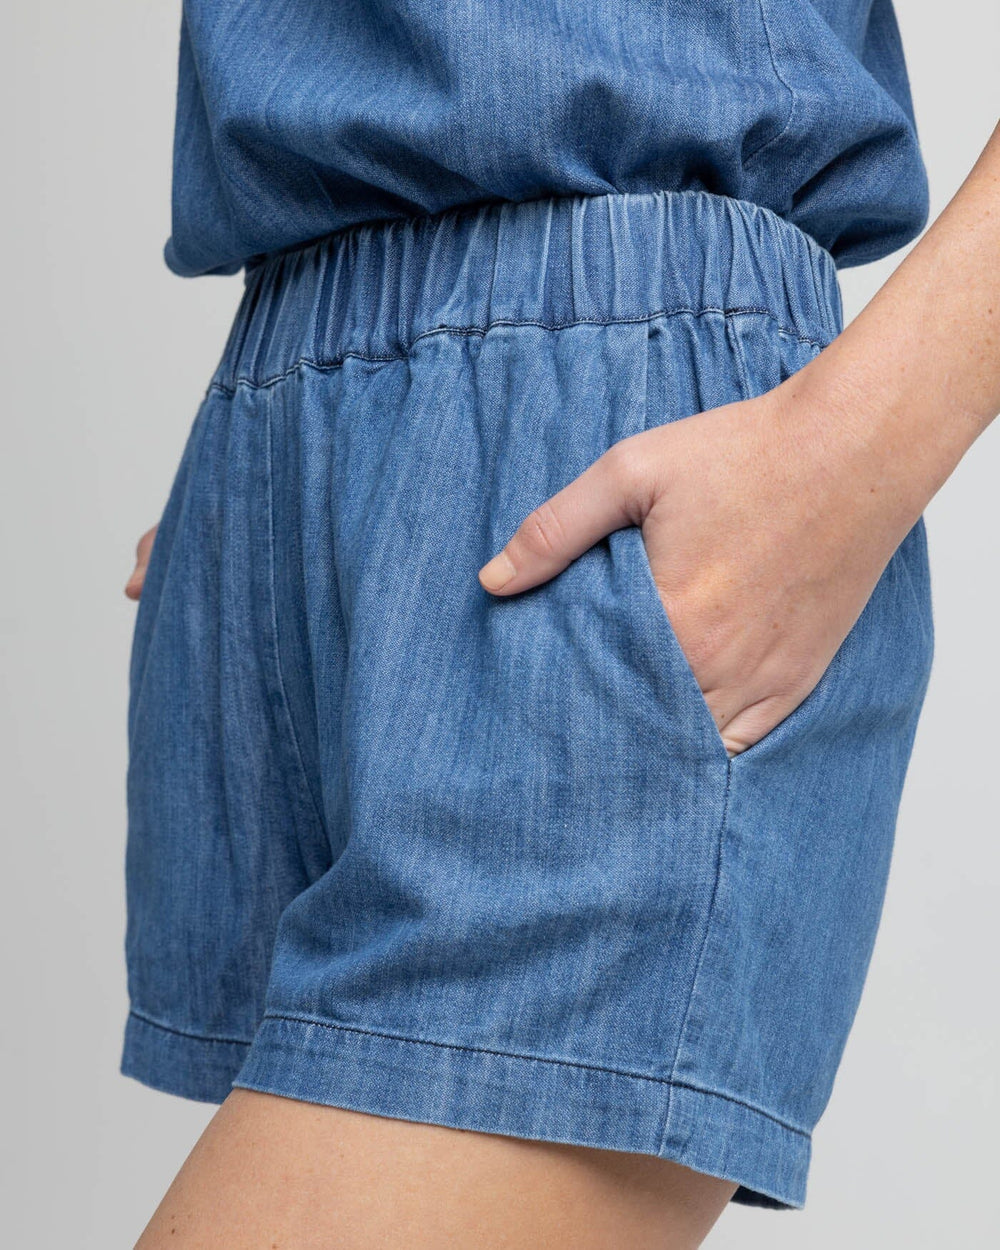 The detail view of the Southern Tide Mary Ellen Denim Short by Southern Tide - Medium Wash Indigo